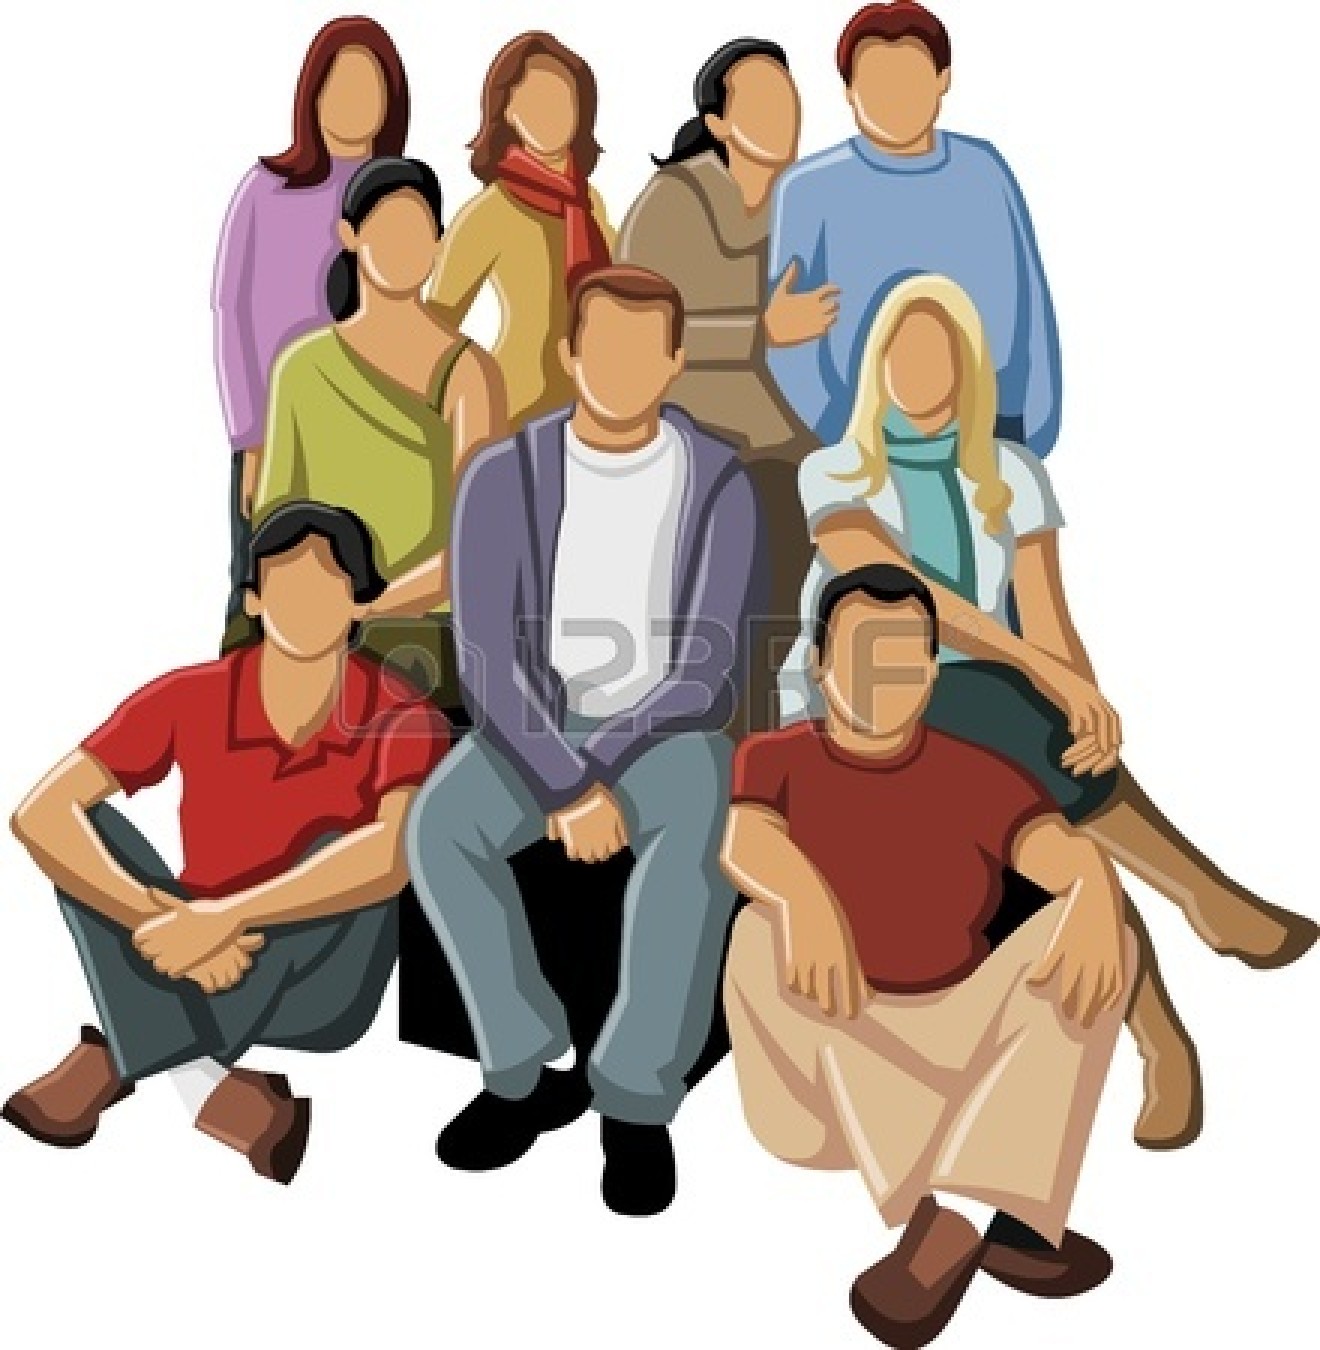 clipart-of-group-of-people-clip-art-library